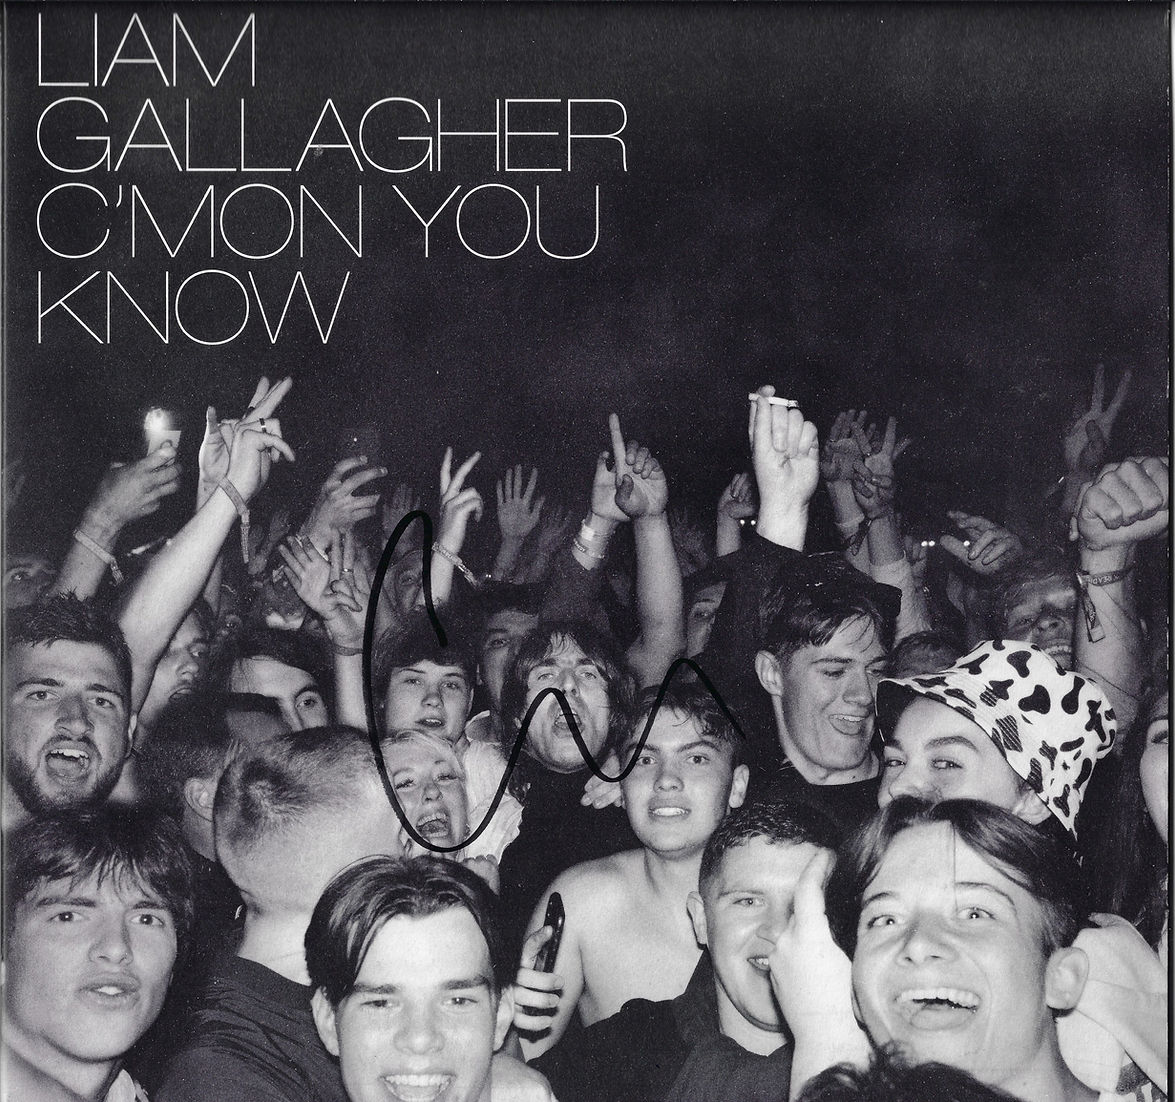 LIAM GALLAGHER SIGNED C’MON YOU KNOW VINYL LP (AFTAL WITNESSED COA)